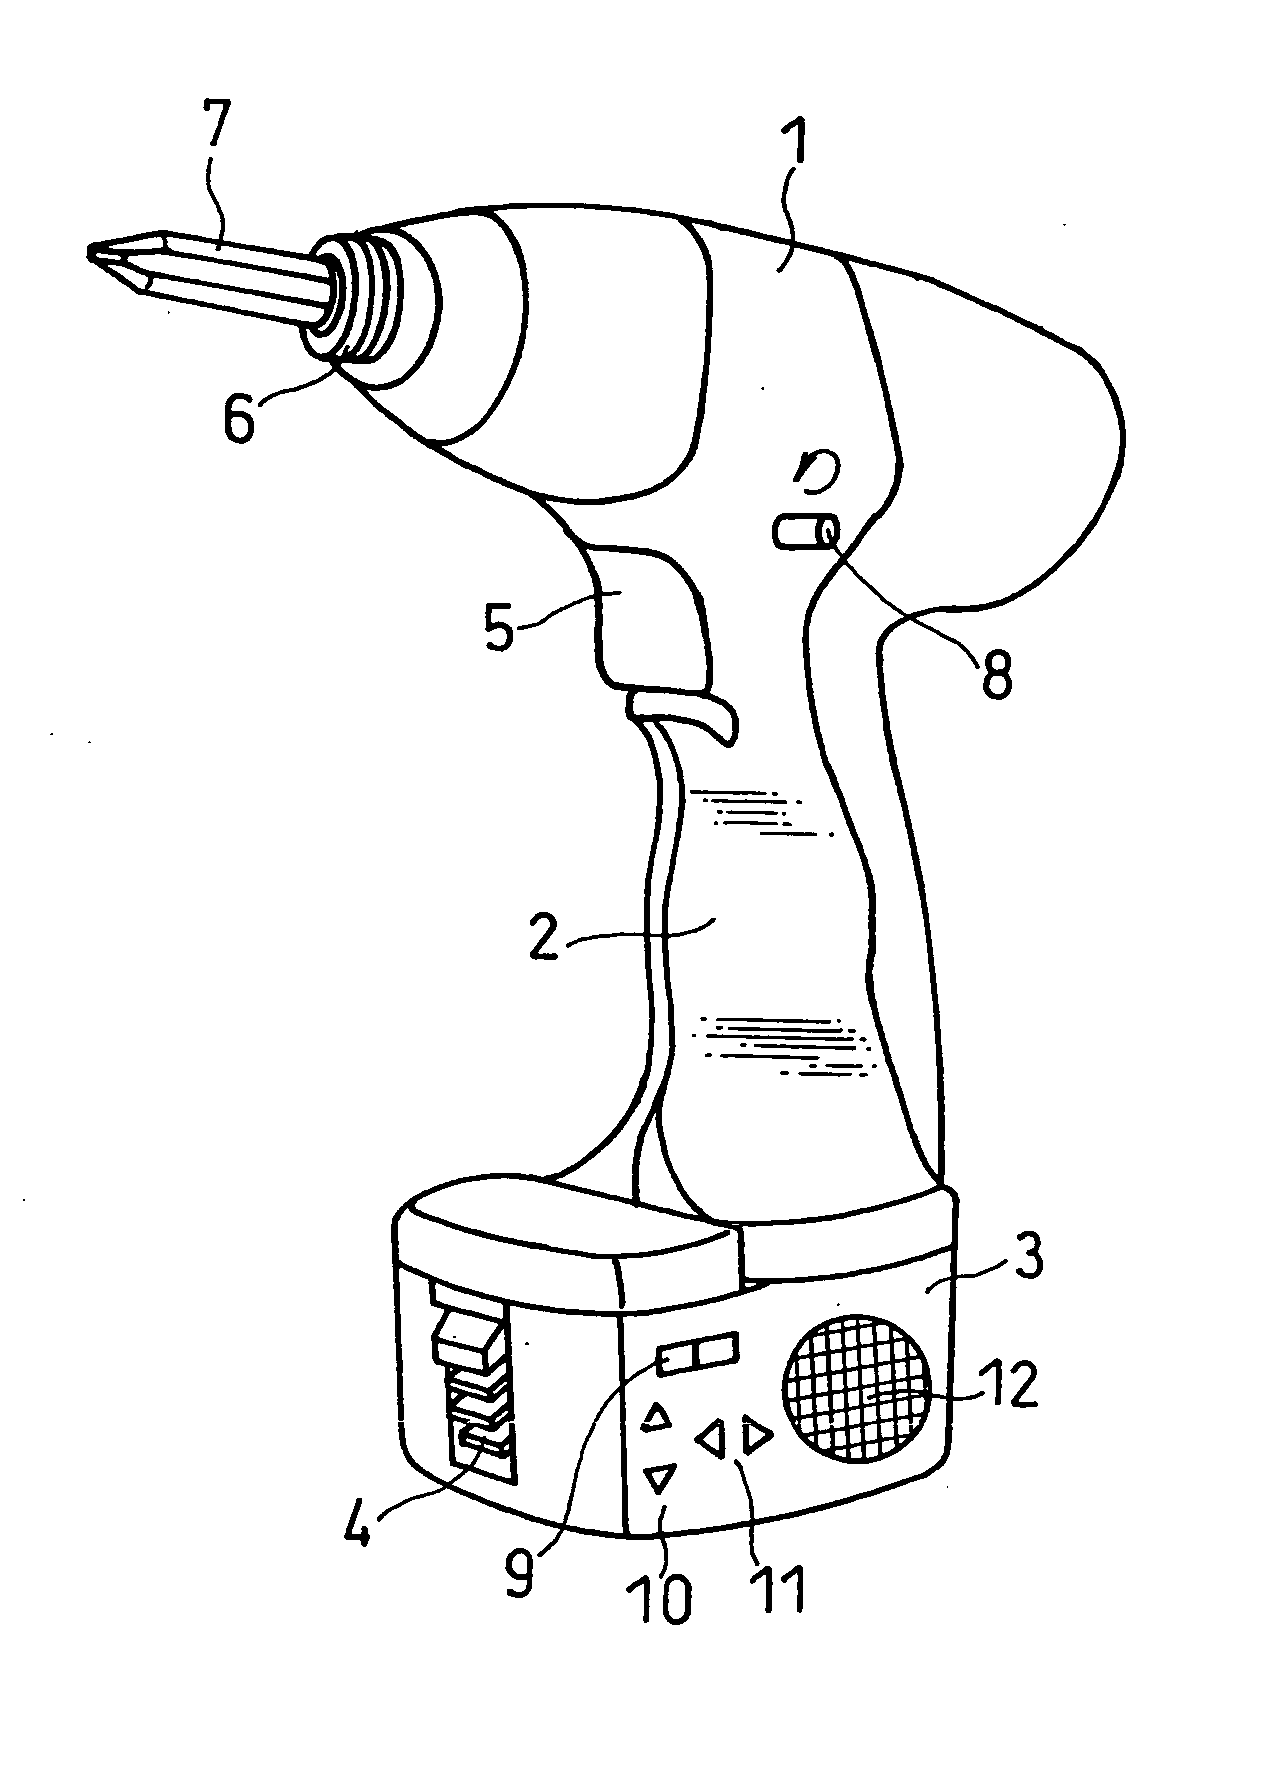 Power tool with additional function